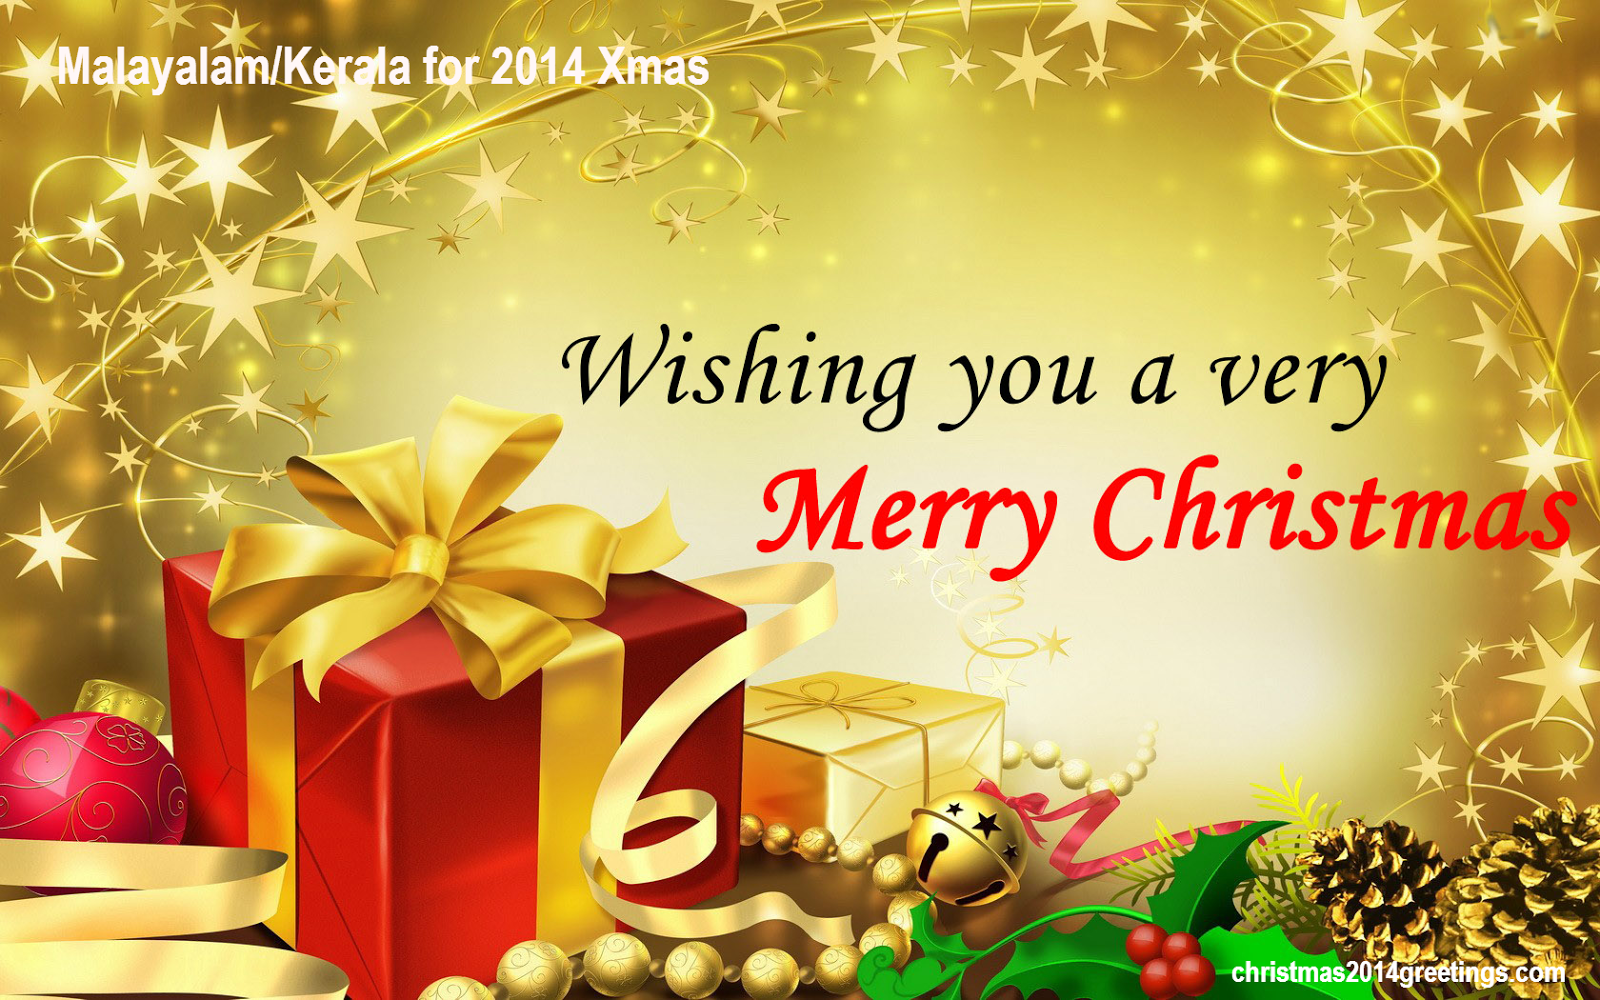 Collection of Malayali Best Christmas Messages 2014